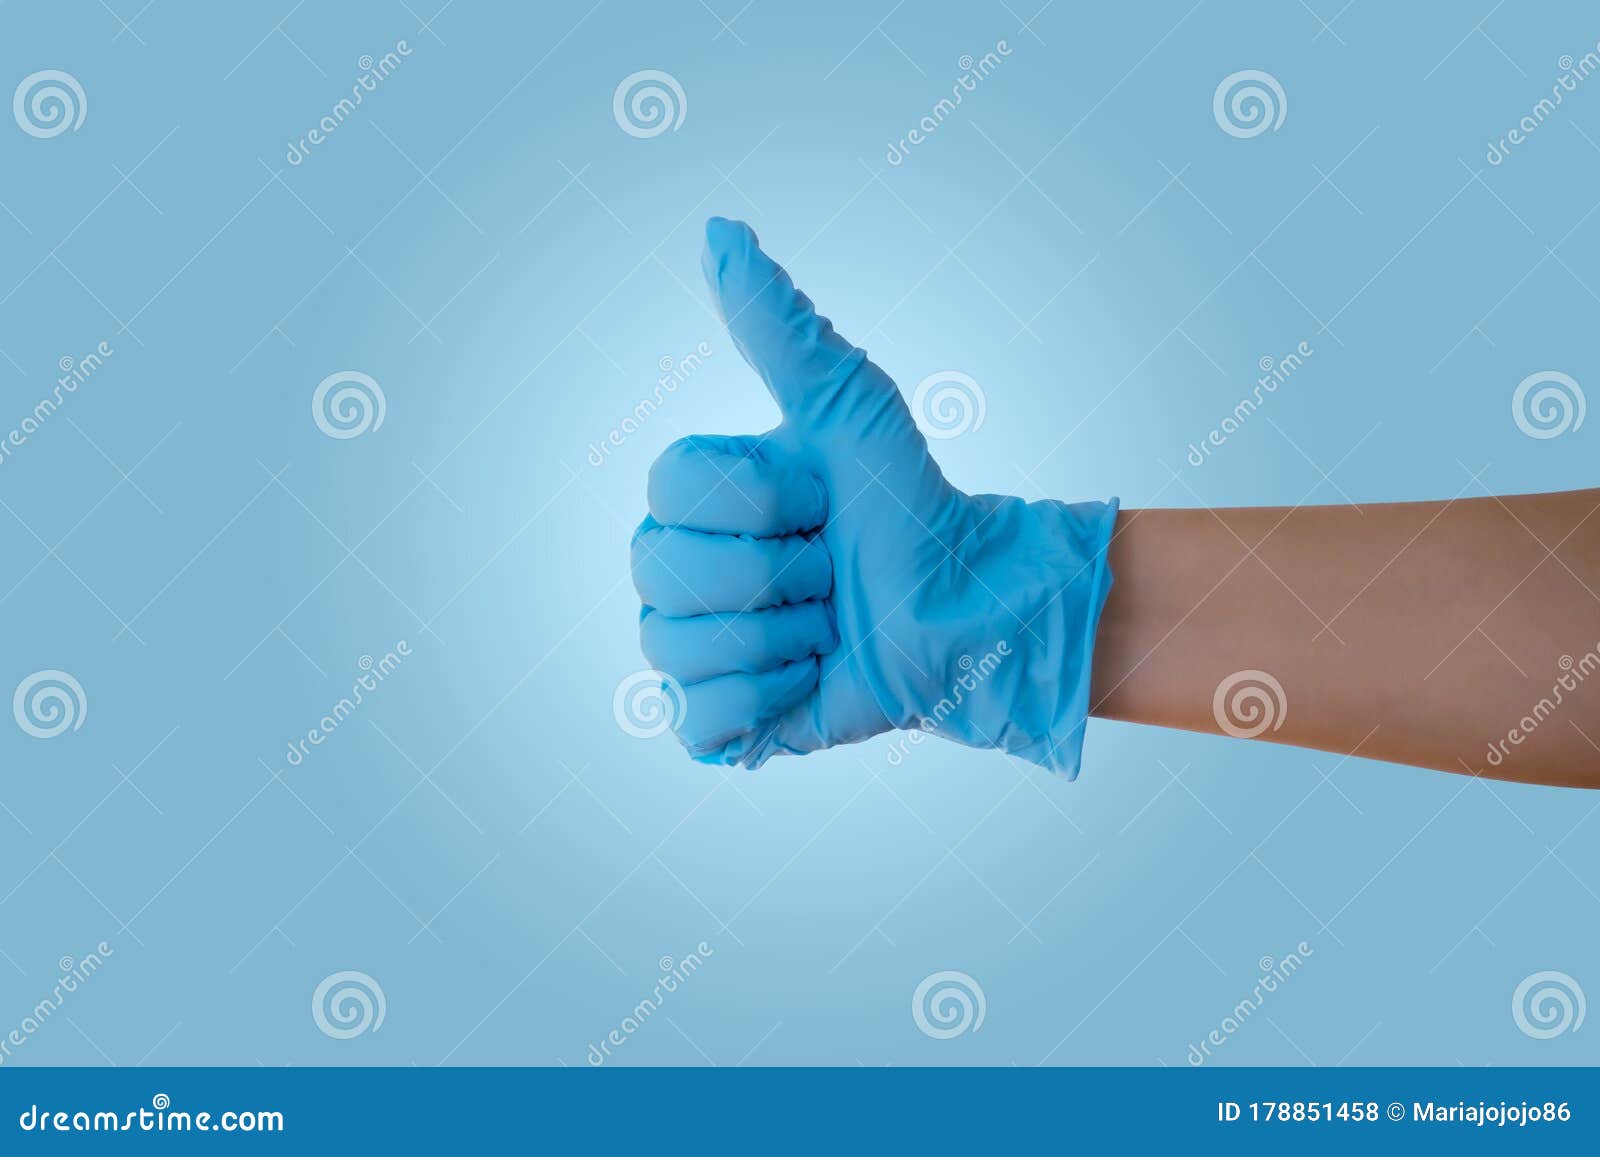 hand with blue latex glove